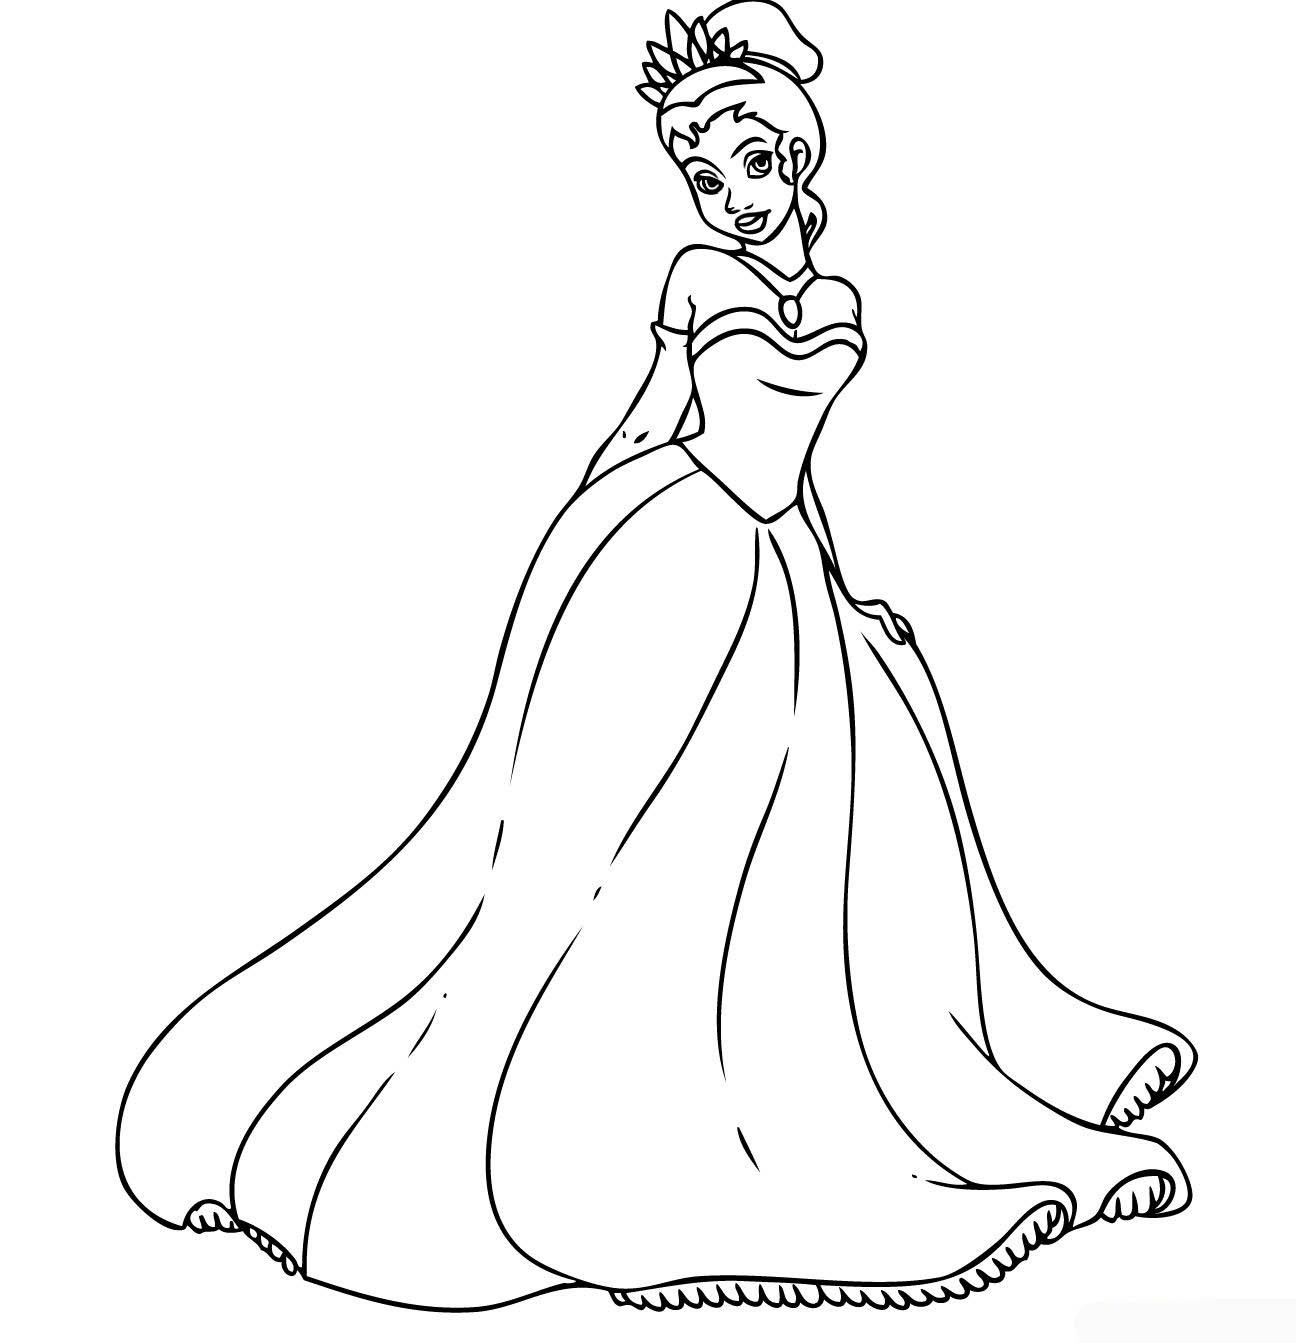 Basic Coloring Pages For Girls
 Free Coloring Pages for Girls Bestofcoloring